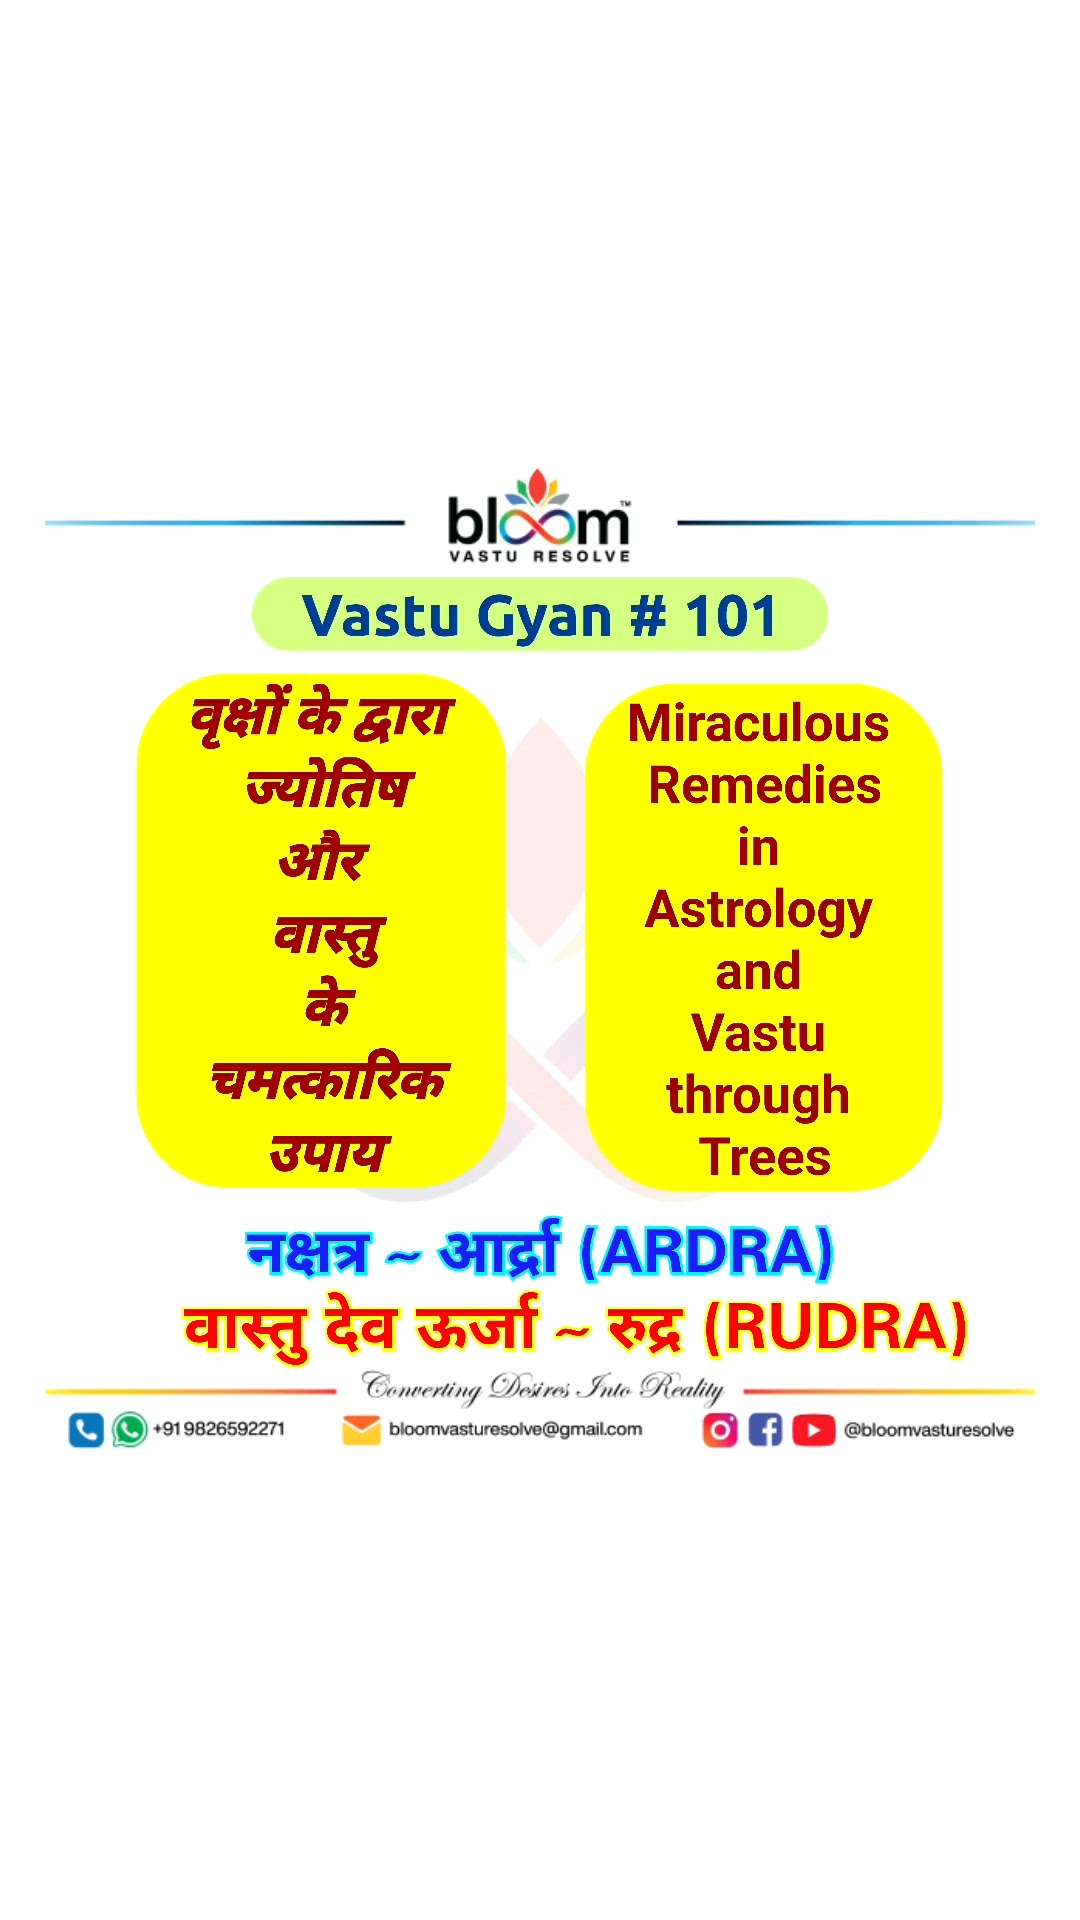 Which Nakshatra tree do you want to know, kindly write in the comment box.

For more Vastu please follow @bloomvasturesolve
on YouTube, Instagram & Facebook
.
.
For personal consultation, feel free to contact certified MahaVastu Expert through
M - 9826592271
Or
bloomvasturesolve@gmail.com

#vastu 
#mahavastu 
#mahavastuexpert
#bloomvasturesolve
#BirthConstellationTree
#vasturemedies
#astrovastu
#astrology
#DivineEnergyRemedy
#Sacredtree
#ardra
#rudra
#sheesham
#northindianrosewood
#शीशम